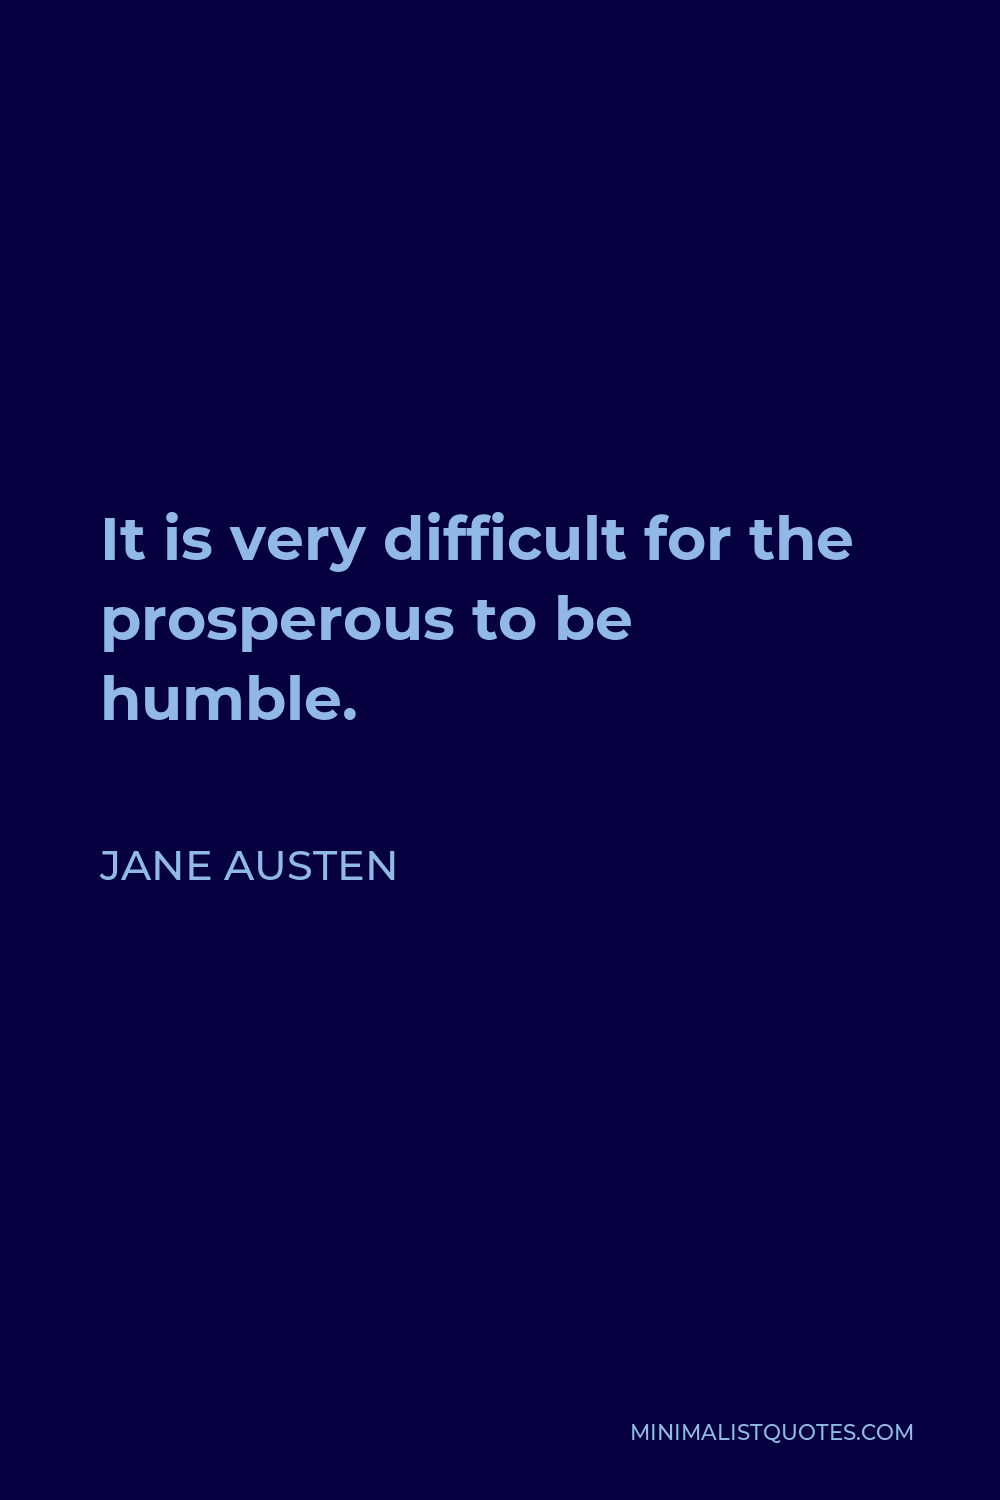 Jane Austen Quote - It is very difficult for the prosperous to be humble.